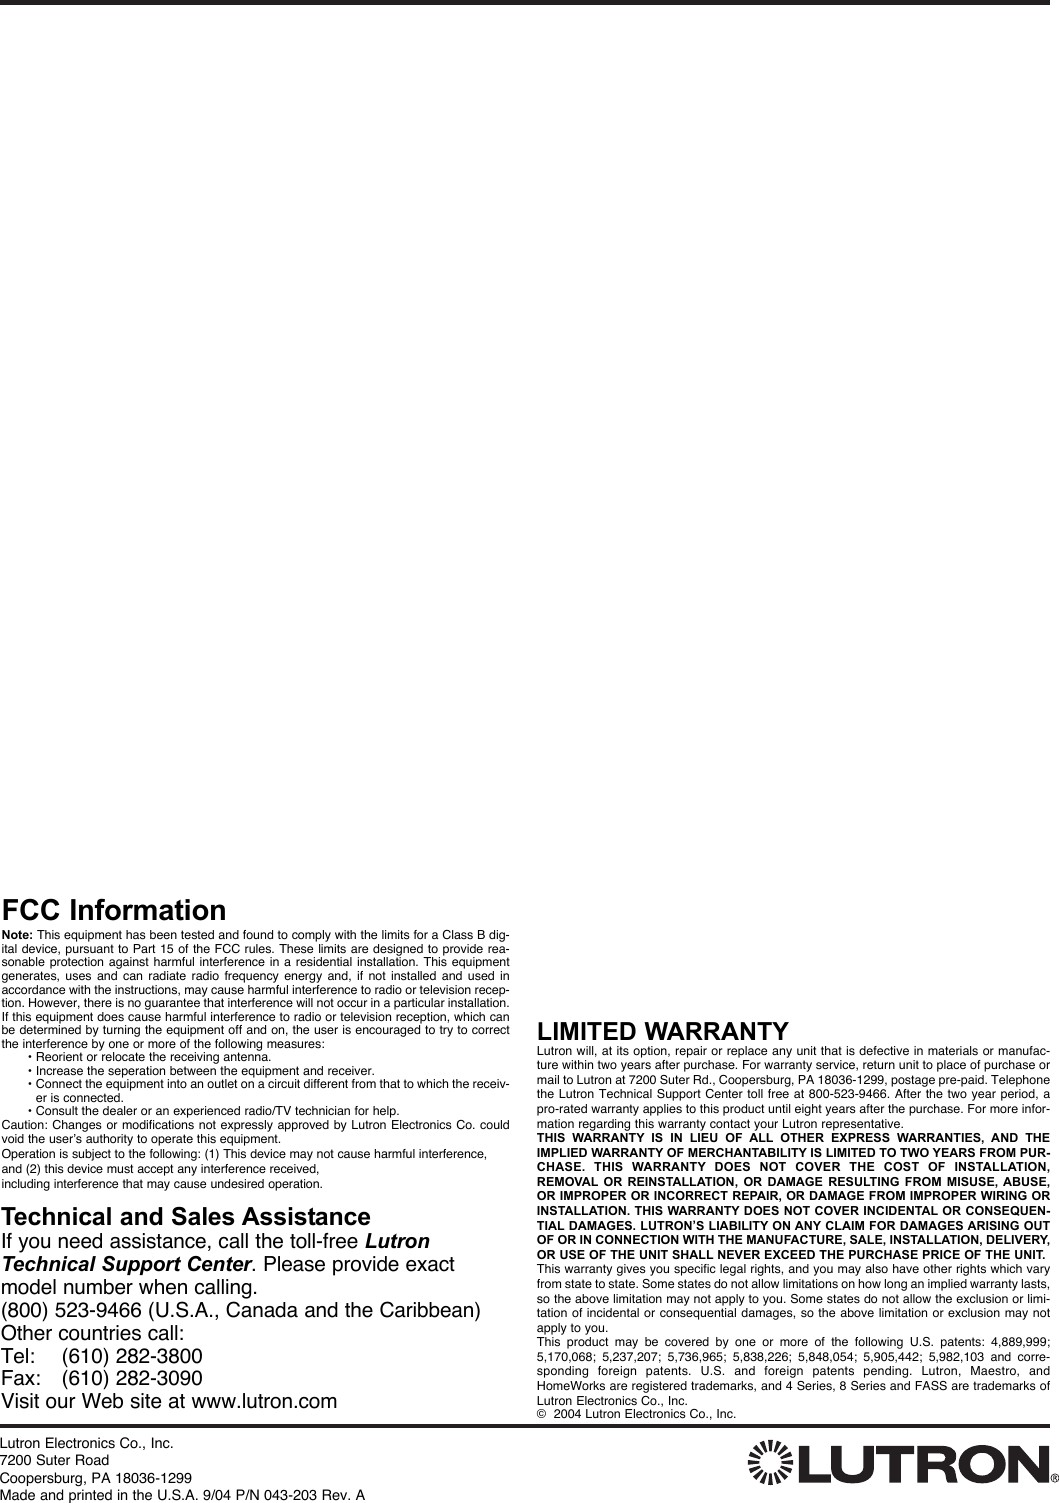 Lutron Electronics Co., Inc. 7200 Suter RoadCoopersburg, PA 18036-1299Made and printed in the U.S.A. 9/04 P/N 043-203 Rev. ALIMITED WARRANTYLutron will, at its option, repair or replace any unit that is defective in materials or manufac-ture within two years after purchase. For warranty service, return unit to place of purchase ormail to Lutron at 7200 Suter Rd., Coopersburg, PA 18036-1299, postage pre-paid. Telephonethe Lutron Technical Support Center toll free at 800-523-9466. After the two year period, apro-rated warranty applies to this product until eight years after the purchase. For more infor-mation regarding this warranty contact your Lutron representative.THIS WARRANTY IS IN LIEU OF ALL OTHER EXPRESS WARRANTIES, AND THEIMPLIED WARRANTY OF MERCHANTABILITY IS LIMITED TO TWO YEARS FROM PUR-CHASE. THIS WARRANTY DOES NOT COVER THE COST OF INSTALLATION,REMOVAL OR REINSTALLATION, OR DAMAGE RESULTING FROM MISUSE, ABUSE,OR IMPROPER OR INCORRECT REPAIR, OR DAMAGE FROM IMPROPER WIRING ORINSTALLATION. THIS WARRANTY DOES NOT COVER INCIDENTAL OR CONSEQUEN-TIAL DAMAGES. LUTRON’S LIABILITY ON ANY CLAIM FOR DAMAGES ARISING OUTOF OR IN CONNECTION WITH THE MANUFACTURE, SALE, INSTALLATION, DELIVERY,OR USE OF THE UNIT SHALL NEVER EXCEED THE PURCHASE PRICE OF THE UNIT.This warranty gives you specific legal rights, and you may also have other rights which varyfrom state to state. Some states do not allow limitations on how long an implied warranty lasts,so the above limitation may not apply to you. Some states do not allow the exclusion or limi-tation of incidental or consequential damages, so the above limitation or exclusion may notapply to you. This product may be covered by one or more of the following U.S. patents: 4,889,999;5,170,068; 5,237,207; 5,736,965; 5,838,226; 5,848,054; 5,905,442; 5,982,103 and corre-sponding foreign patents. U.S. and foreign patents pending. Lutron, Maestro, andHomeWorks are registered trademarks, and 4 Series, 8 Series and FASS are trademarks ofLutron Electronics Co., Inc.©  2004 Lutron Electronics Co., Inc.Technical and Sales AssistanceIf you need assistance, call the toll-free LutronTechnical Support Center. Please provide exactmodel number when calling.(800) 523-9466 (U.S.A., Canada and the Caribbean)Other countries call:Tel:    (610) 282-3800Fax: (610) 282-3090Visit our Web site at www.lutron.comFCC InformationNote: This equipment has been tested and found to comply with the limits for a Class B dig-ital device, pursuant to Part 15 of the FCC rules. These limits are designed to provide rea-sonable protection against harmful interference in a residential installation. This equipmentgenerates, uses and can radiate radio frequency energy and, if not installed and used inaccordance with the instructions, may cause harmful interference to radio or television recep-tion. However, there is no guarantee that interference will not occur in a particular installation.If this equipment does cause harmful interference to radio or television reception, which canbe determined by turning the equipment off and on, the user is encouraged to try to correctthe interference by one or more of the following measures: • Reorient or relocate the receiving antenna.• Increase the seperation between the equipment and receiver.• Connect the equipment into an outlet on a circuit different from that to which the receiv-er is connected.• Consult the dealer or an experienced radio/TV technician for help.Caution: Changes or modifications not expressly approved by Lutron Electronics Co. couldvoid the user’s authority to operate this equipment.Operation is subject to the following: (1) This device may not cause harmful interference,and (2) this device must accept any interference received, including interference that may cause undesired operation.